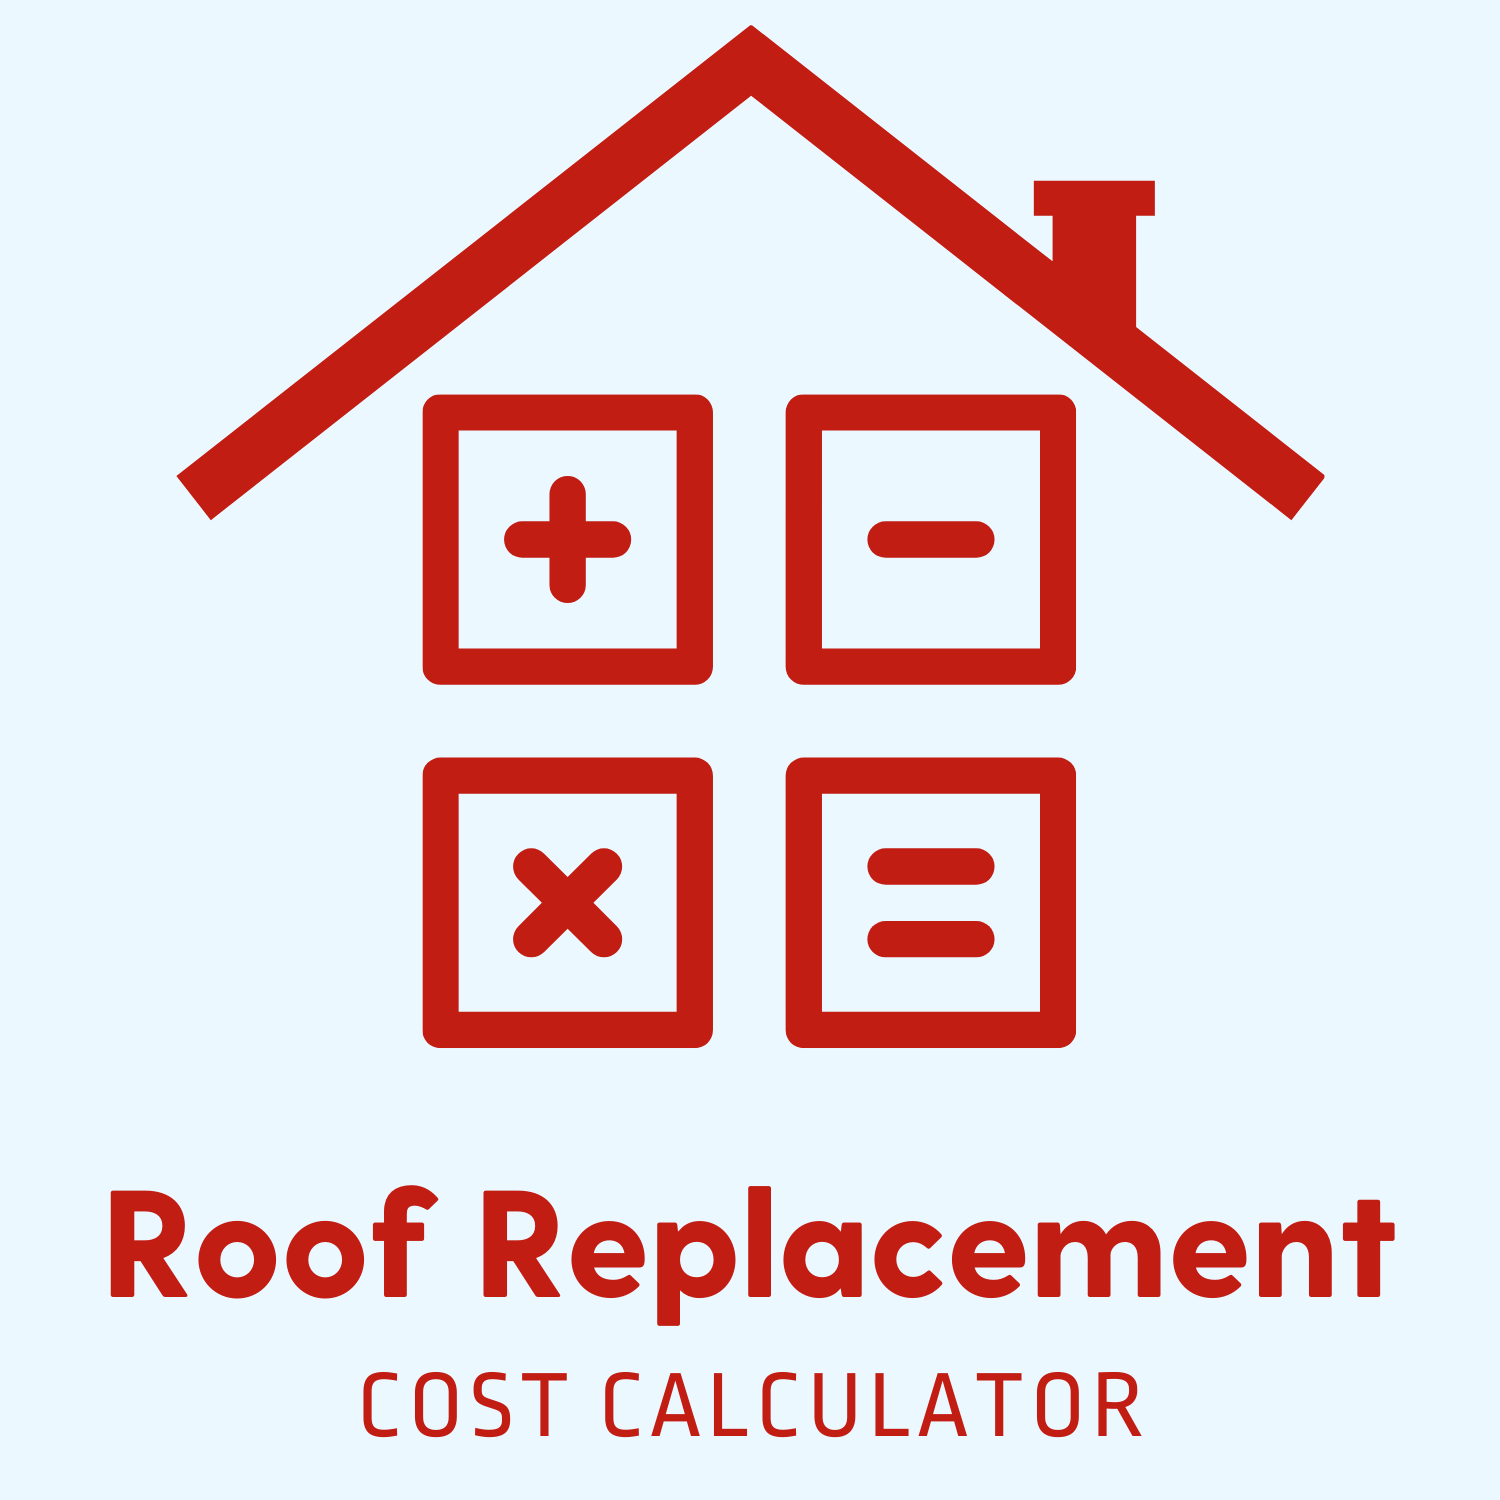 Roof Replacement Cost Calculator by Austin Roofing and Construction